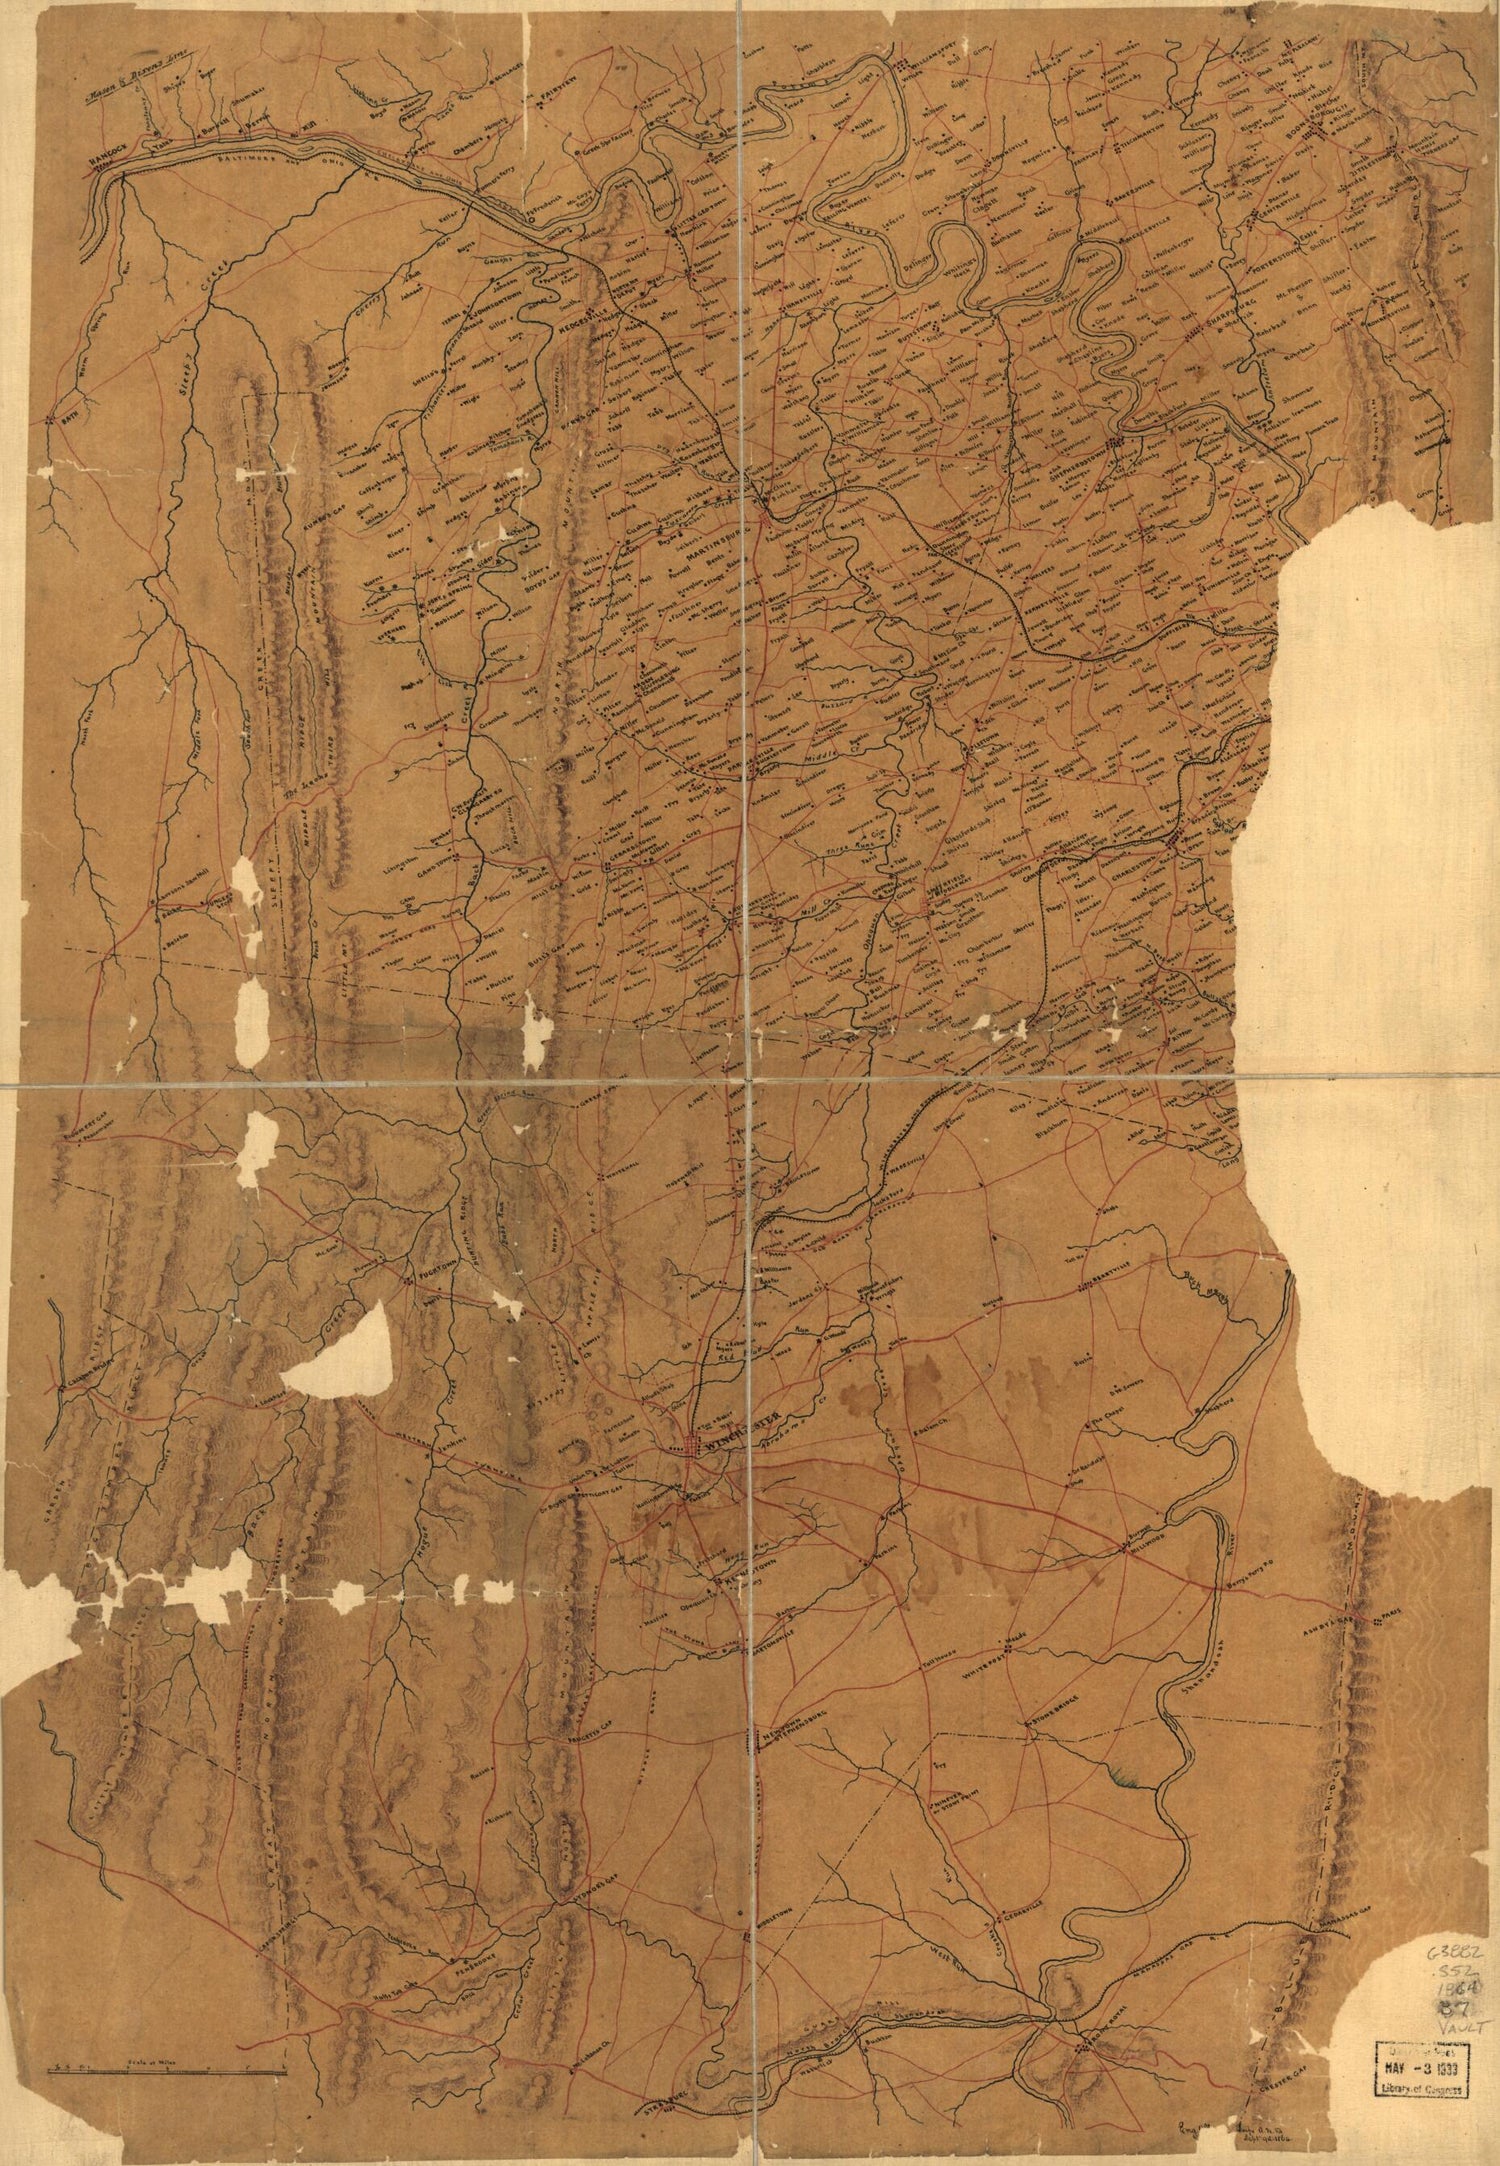 This old map of Map of the Lower Shenandoah Valley, Virginia from 1864 was created by Samuel Howell Brown, Jubal Anderson Early in 1864